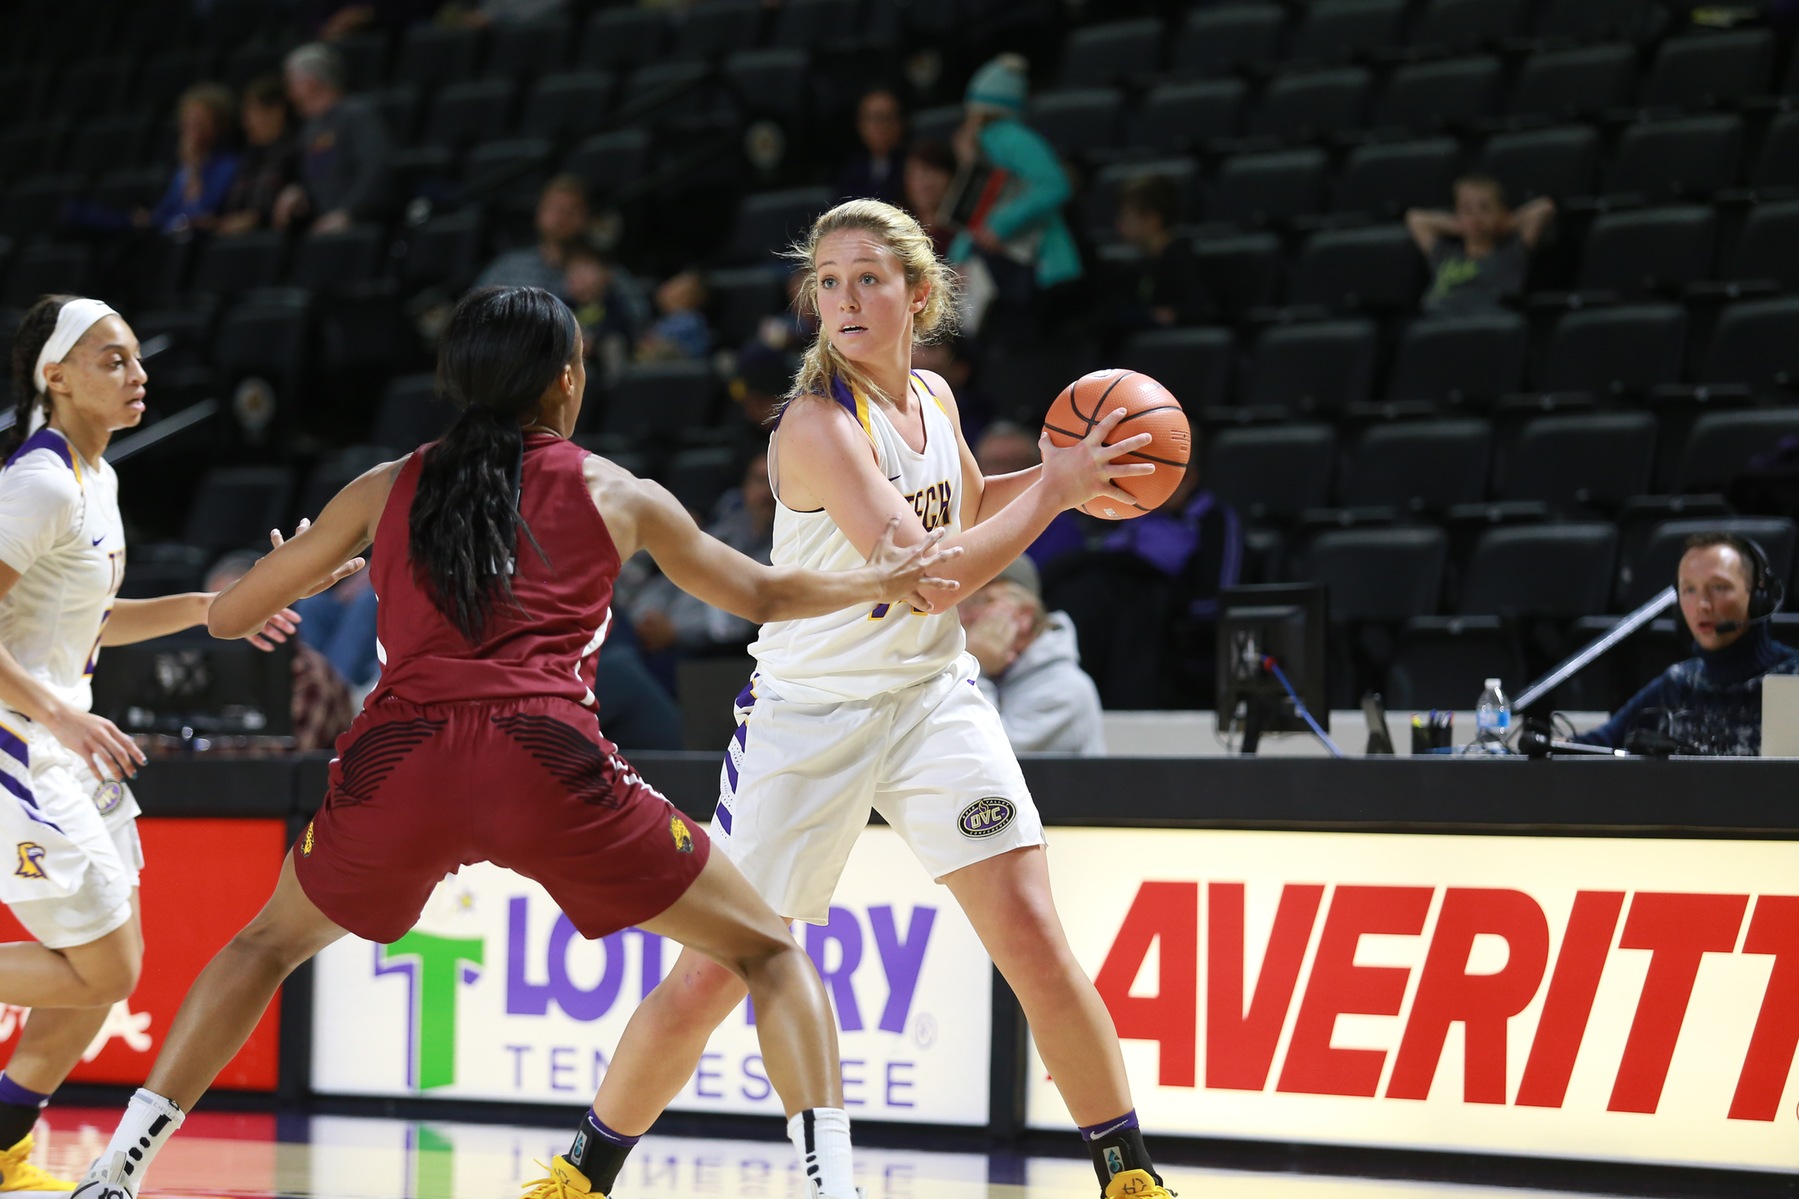 Tech ends non-conference schedule this week with Winthrop, Lipscomb